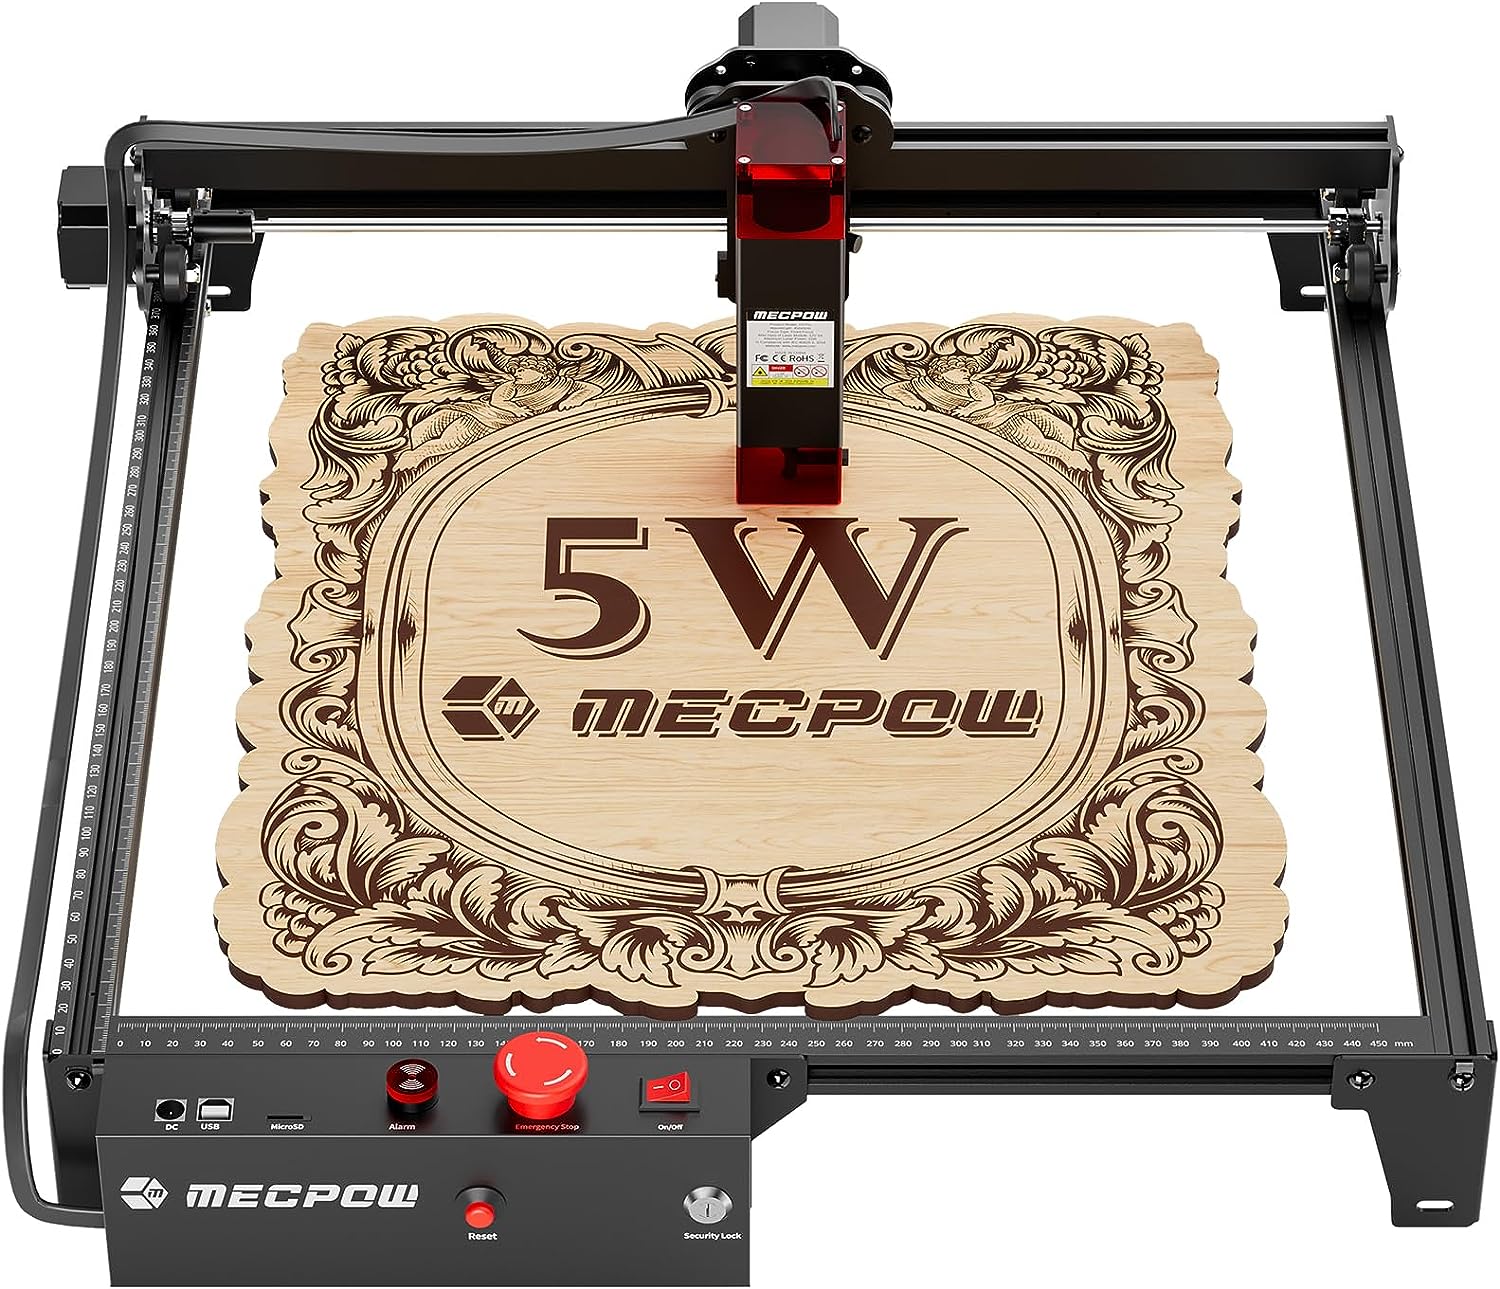 Falcon2 22W Laser Engraver & Cutter Lets You Unleash Your Creativity With  Precision And Power